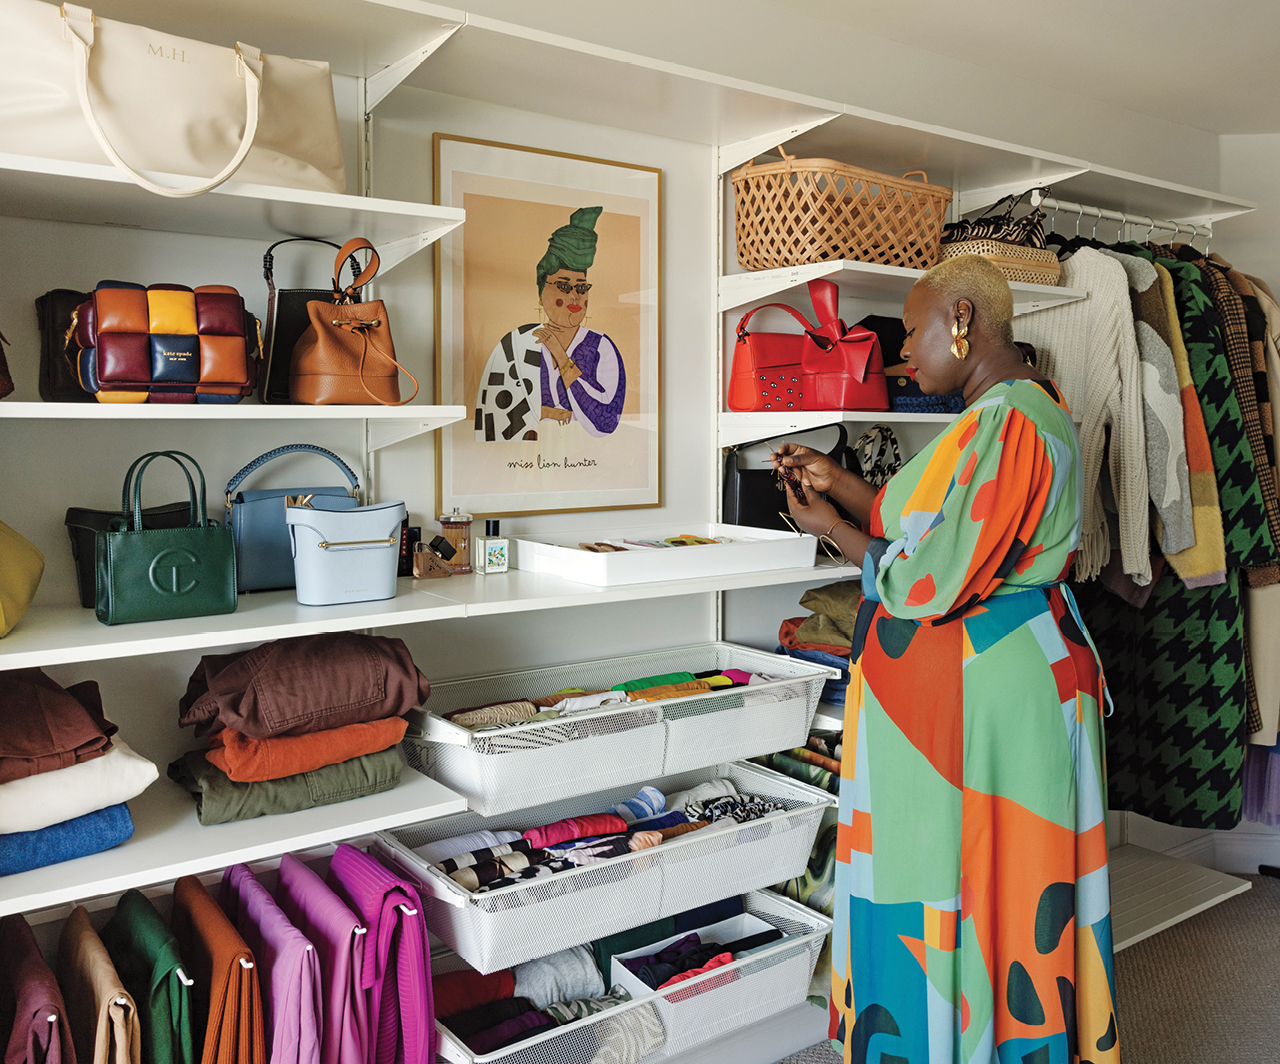 Musemo Handahu in her closet for a home tour of her maximalist decor Halifax rental.